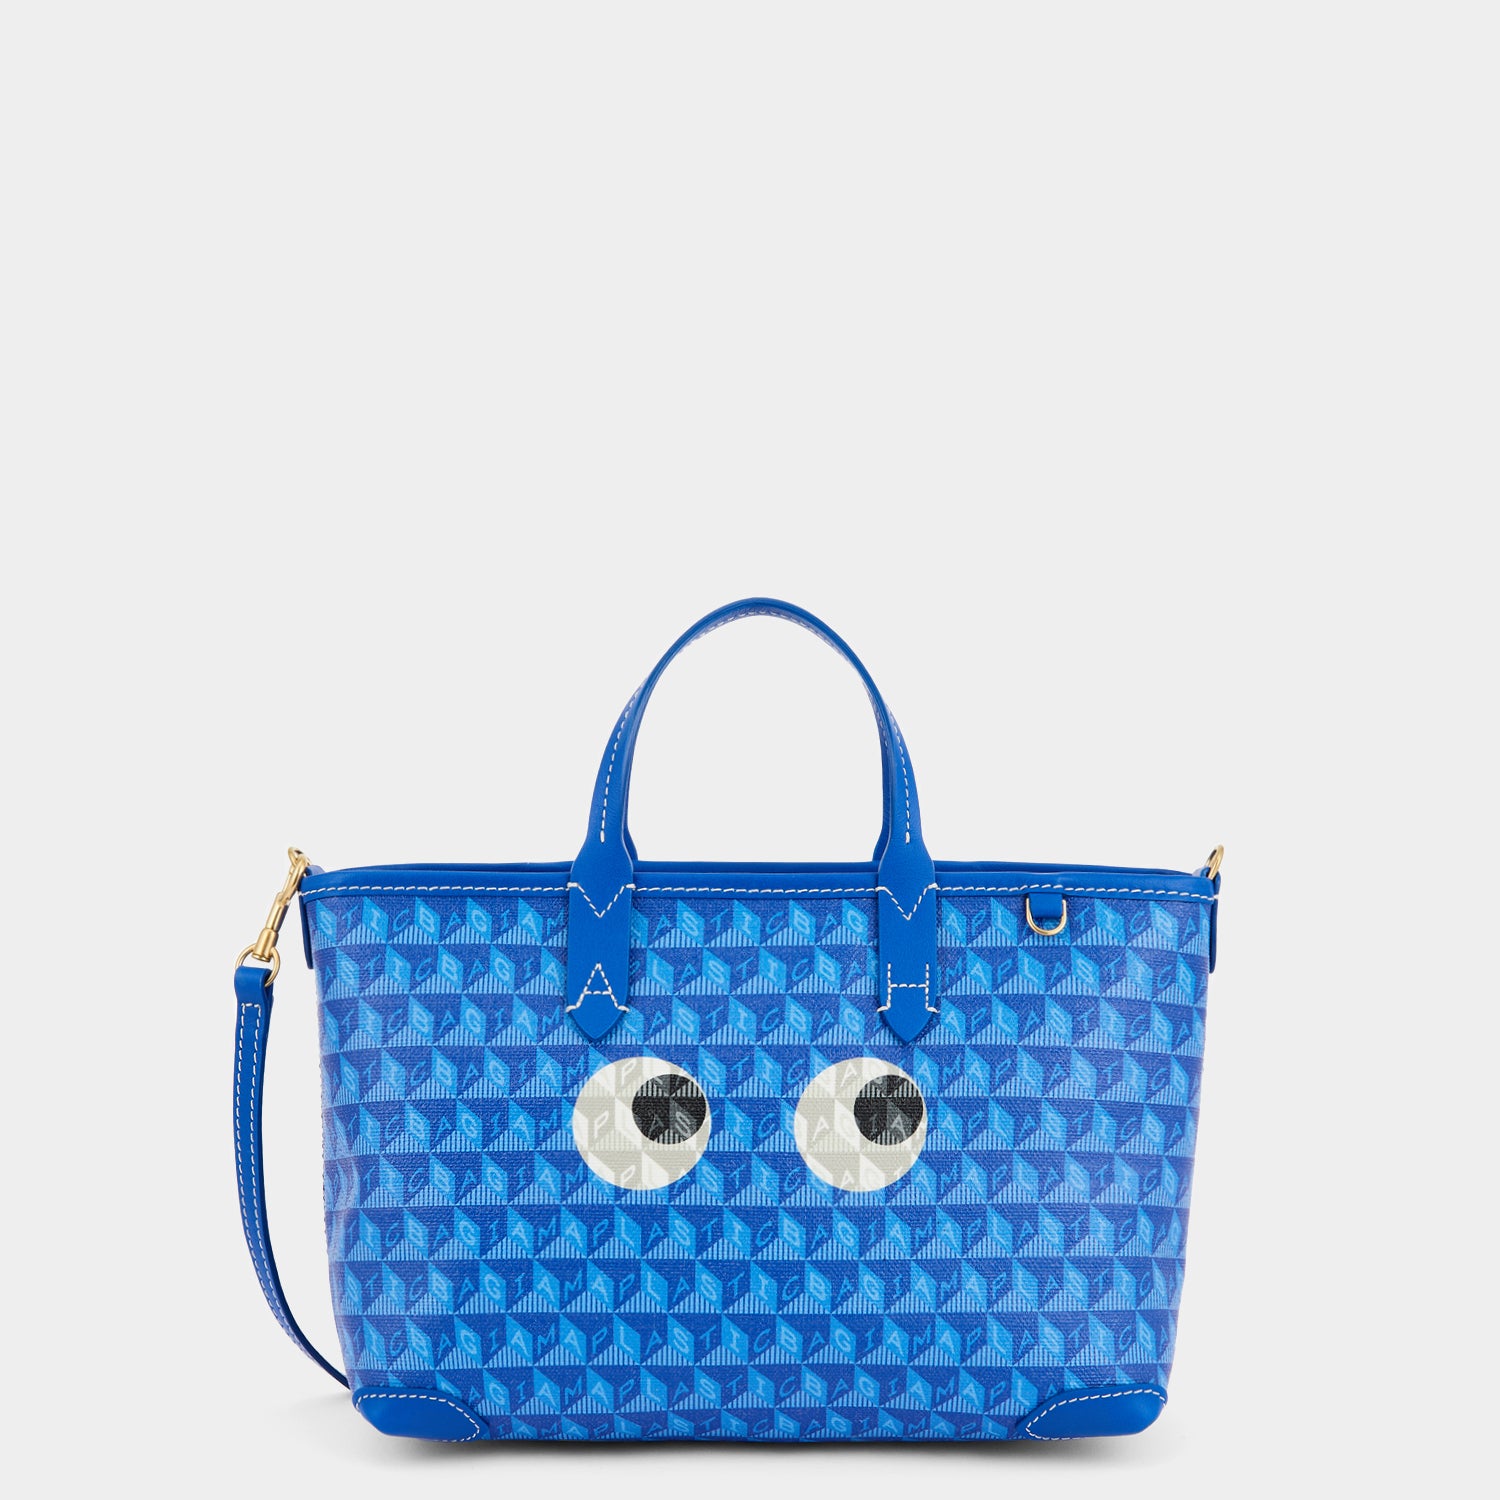 「I AM A Plastic Bag」 XS アイズ トート -

                  
                    Recycled Coated Canvas in Electric Blue -
                  

                  Anya Hindmarch JP
